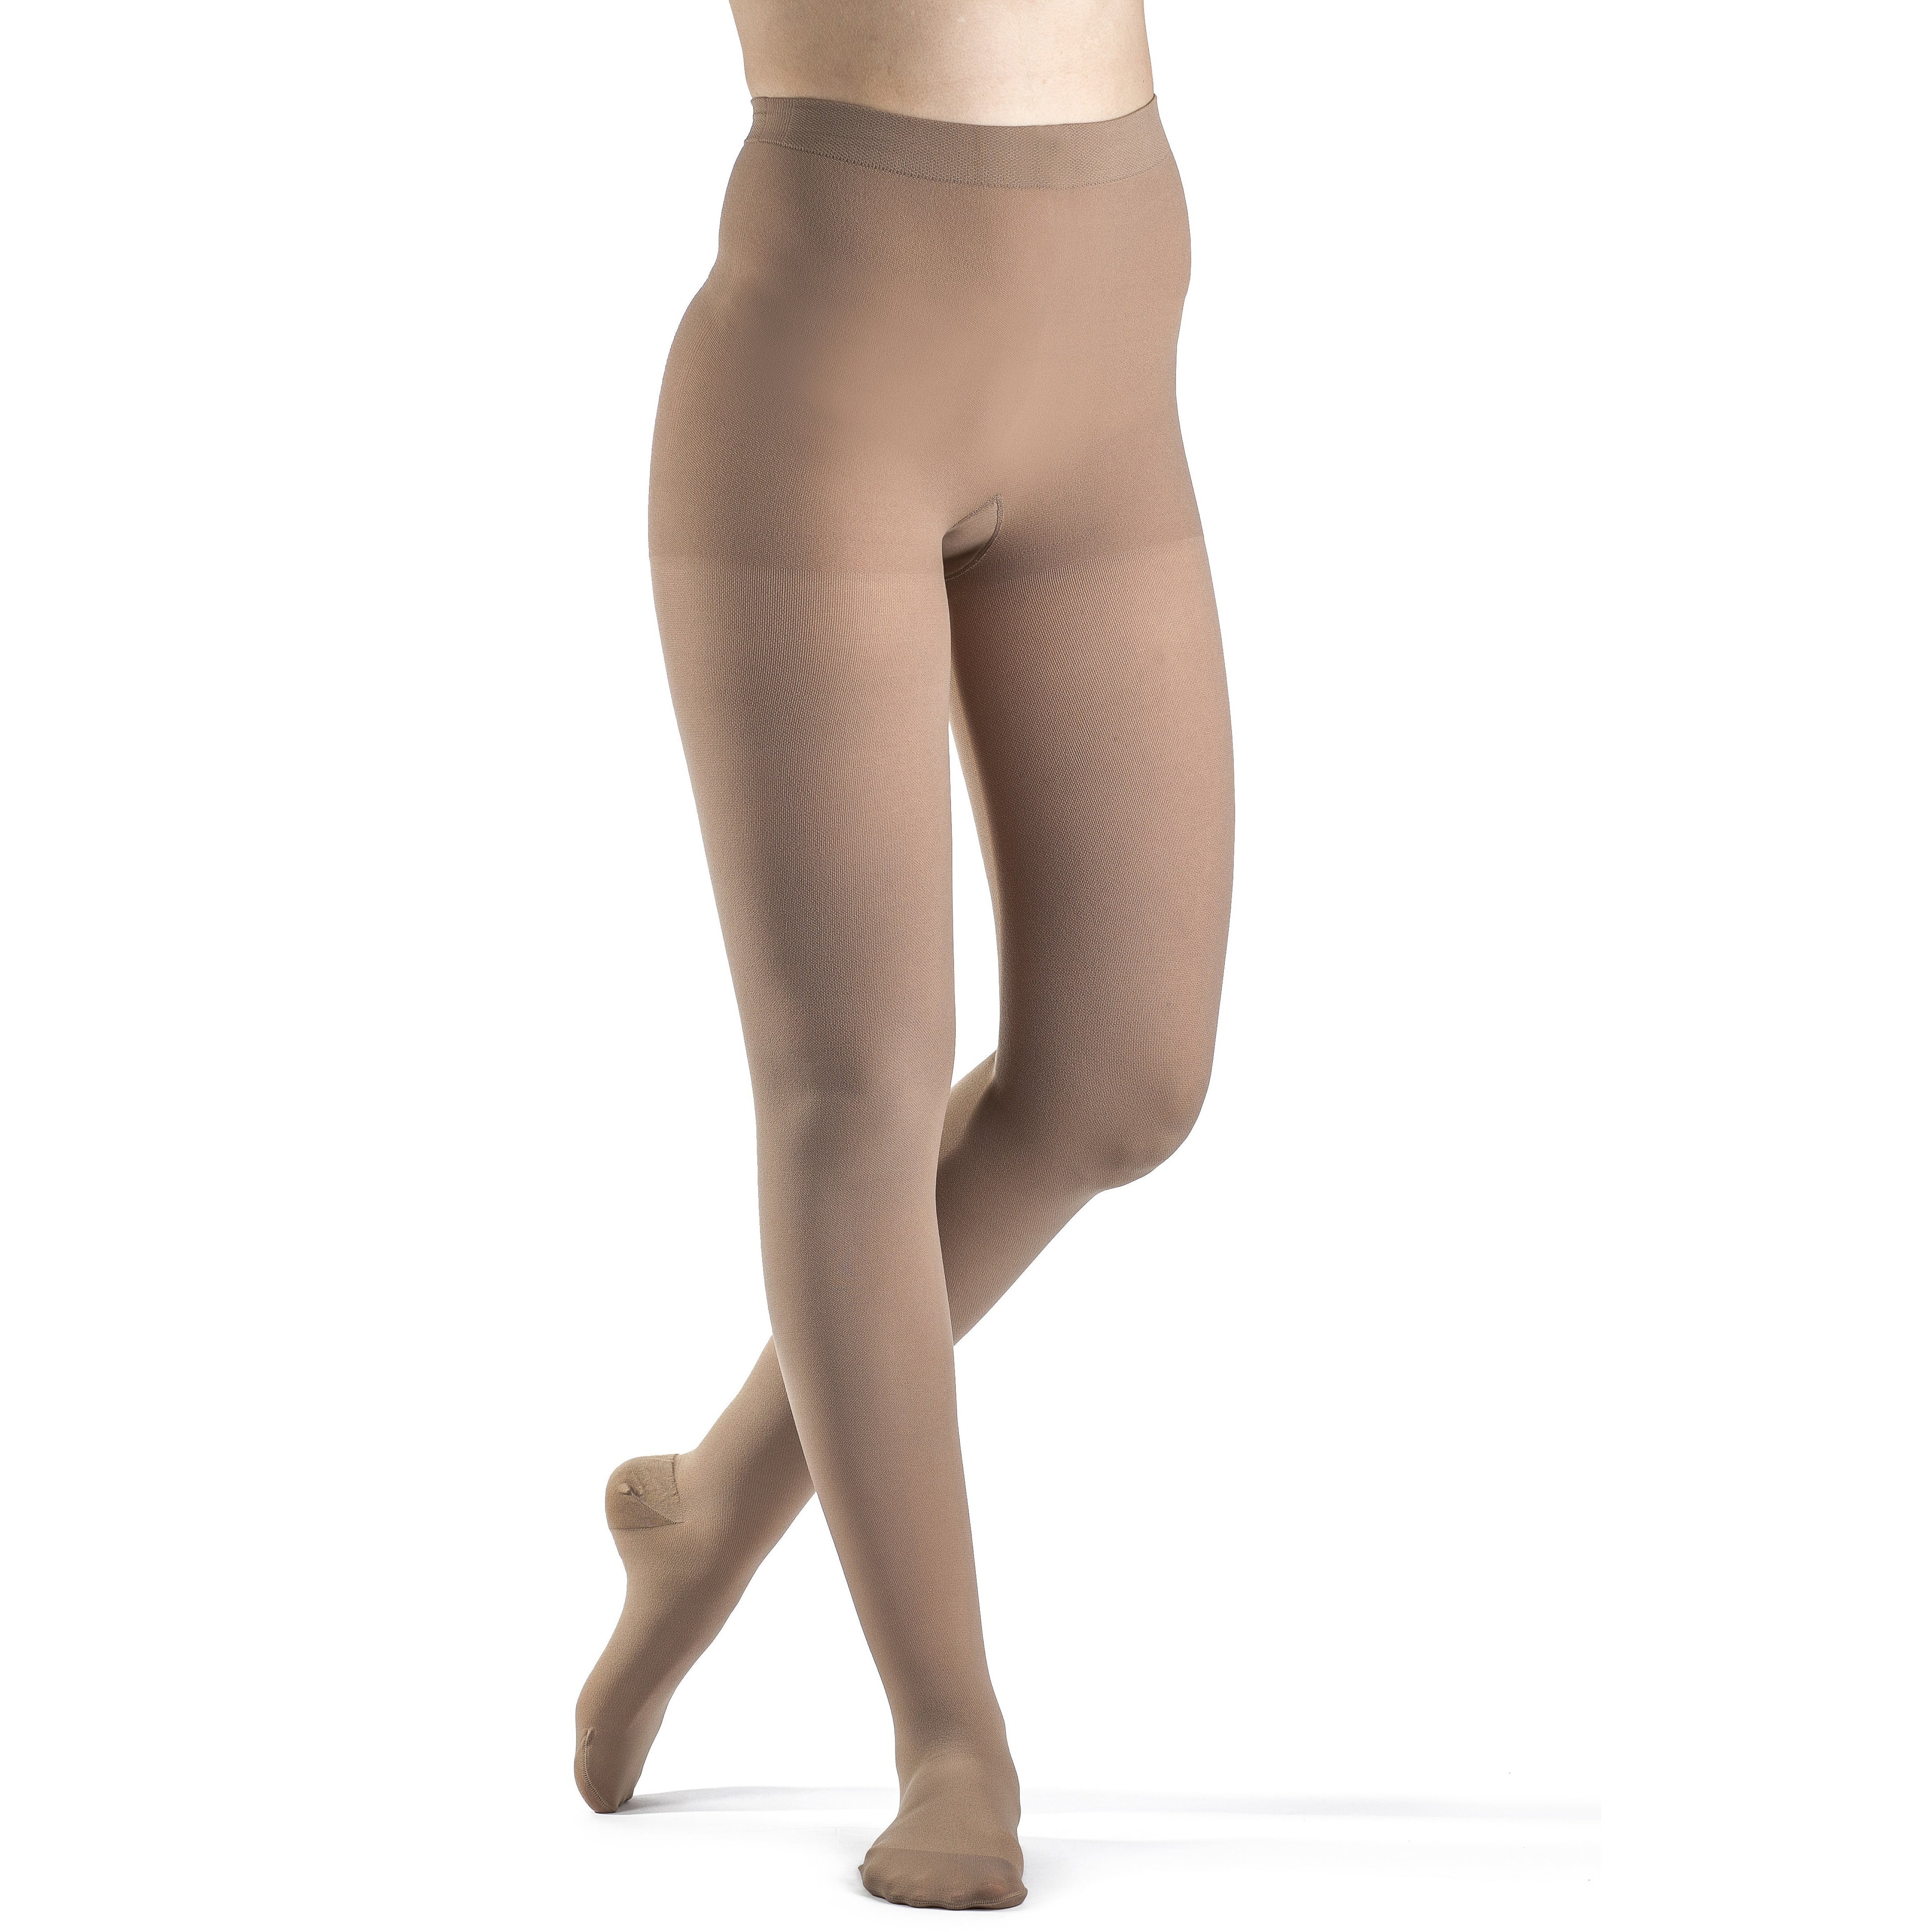 ZODEYI Medical Compression Pantyhose for Women 20-30mmHg